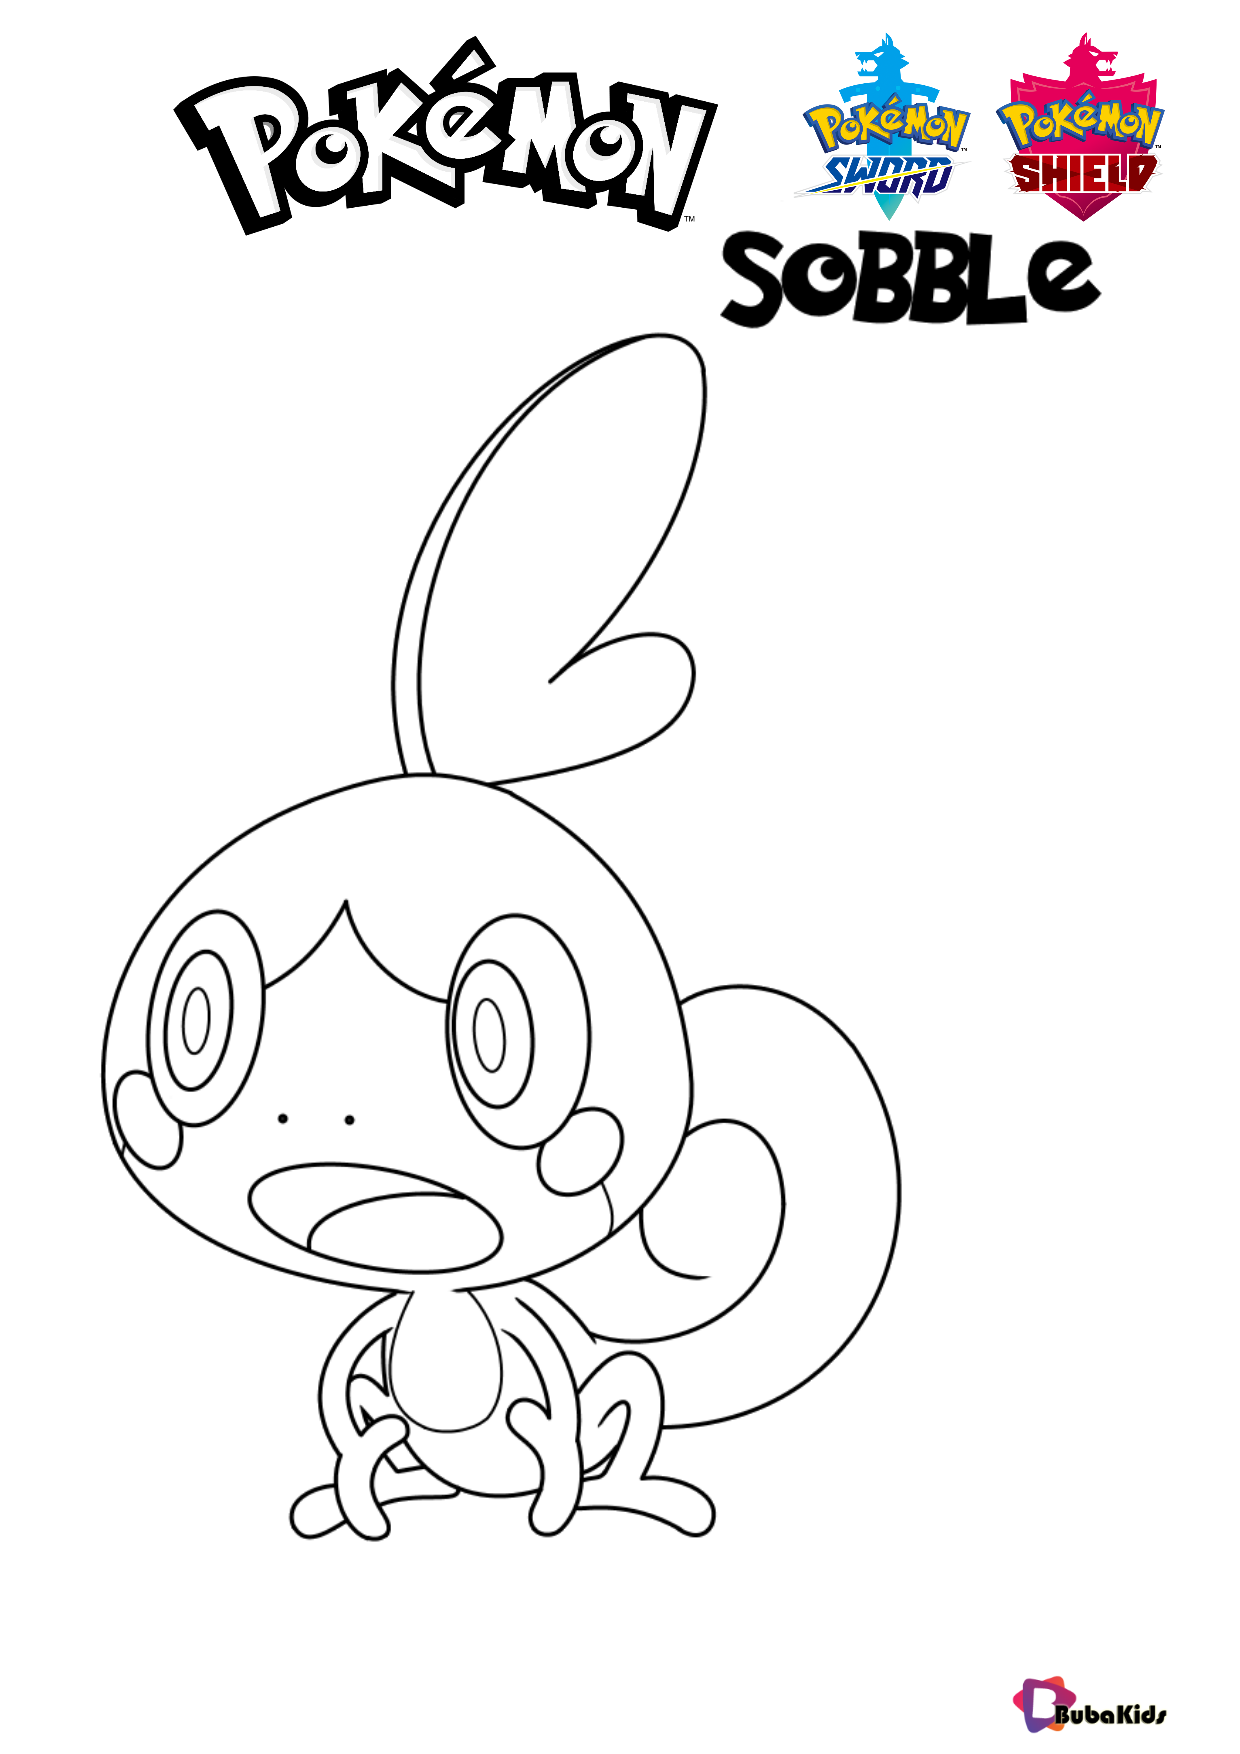 Pokemon Sword and Shield Pokemon Sobble coloring pages Wallpaper